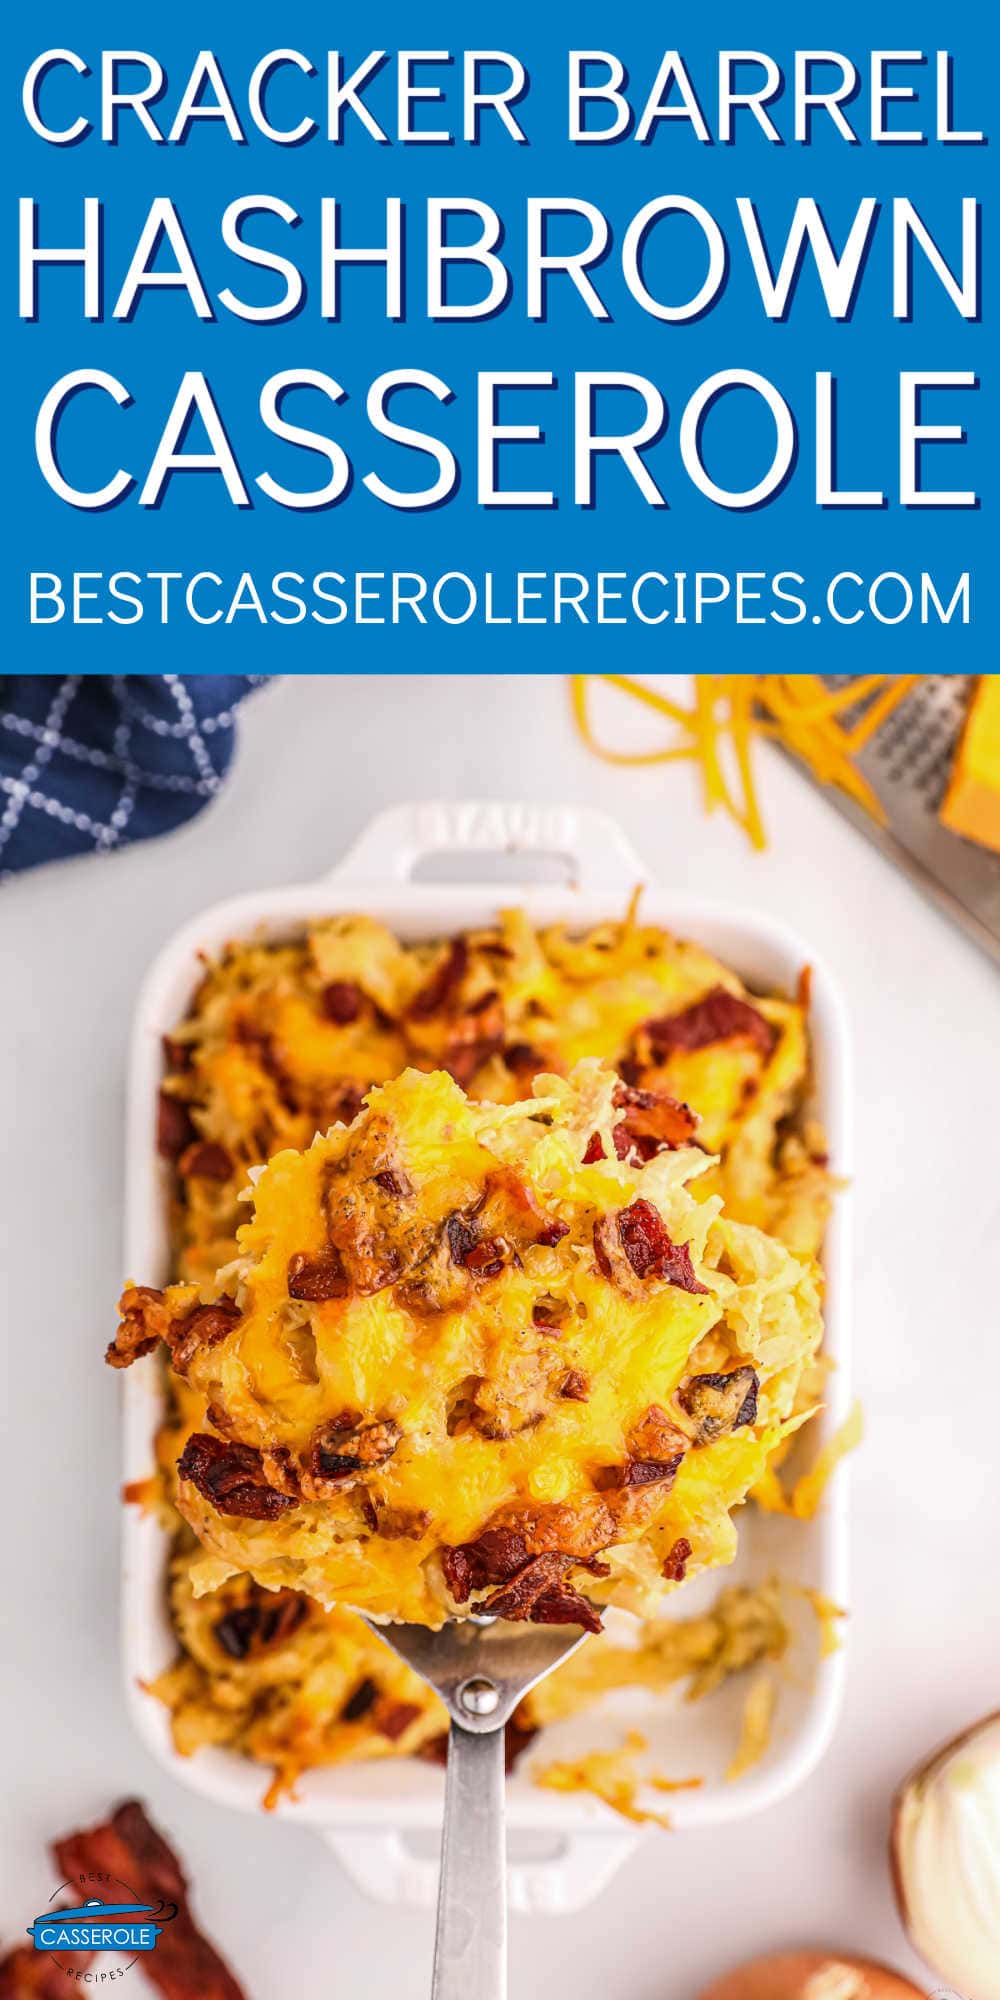 spatula holding a square of casserole with blue banner and text "copycat hashbrown casserole"